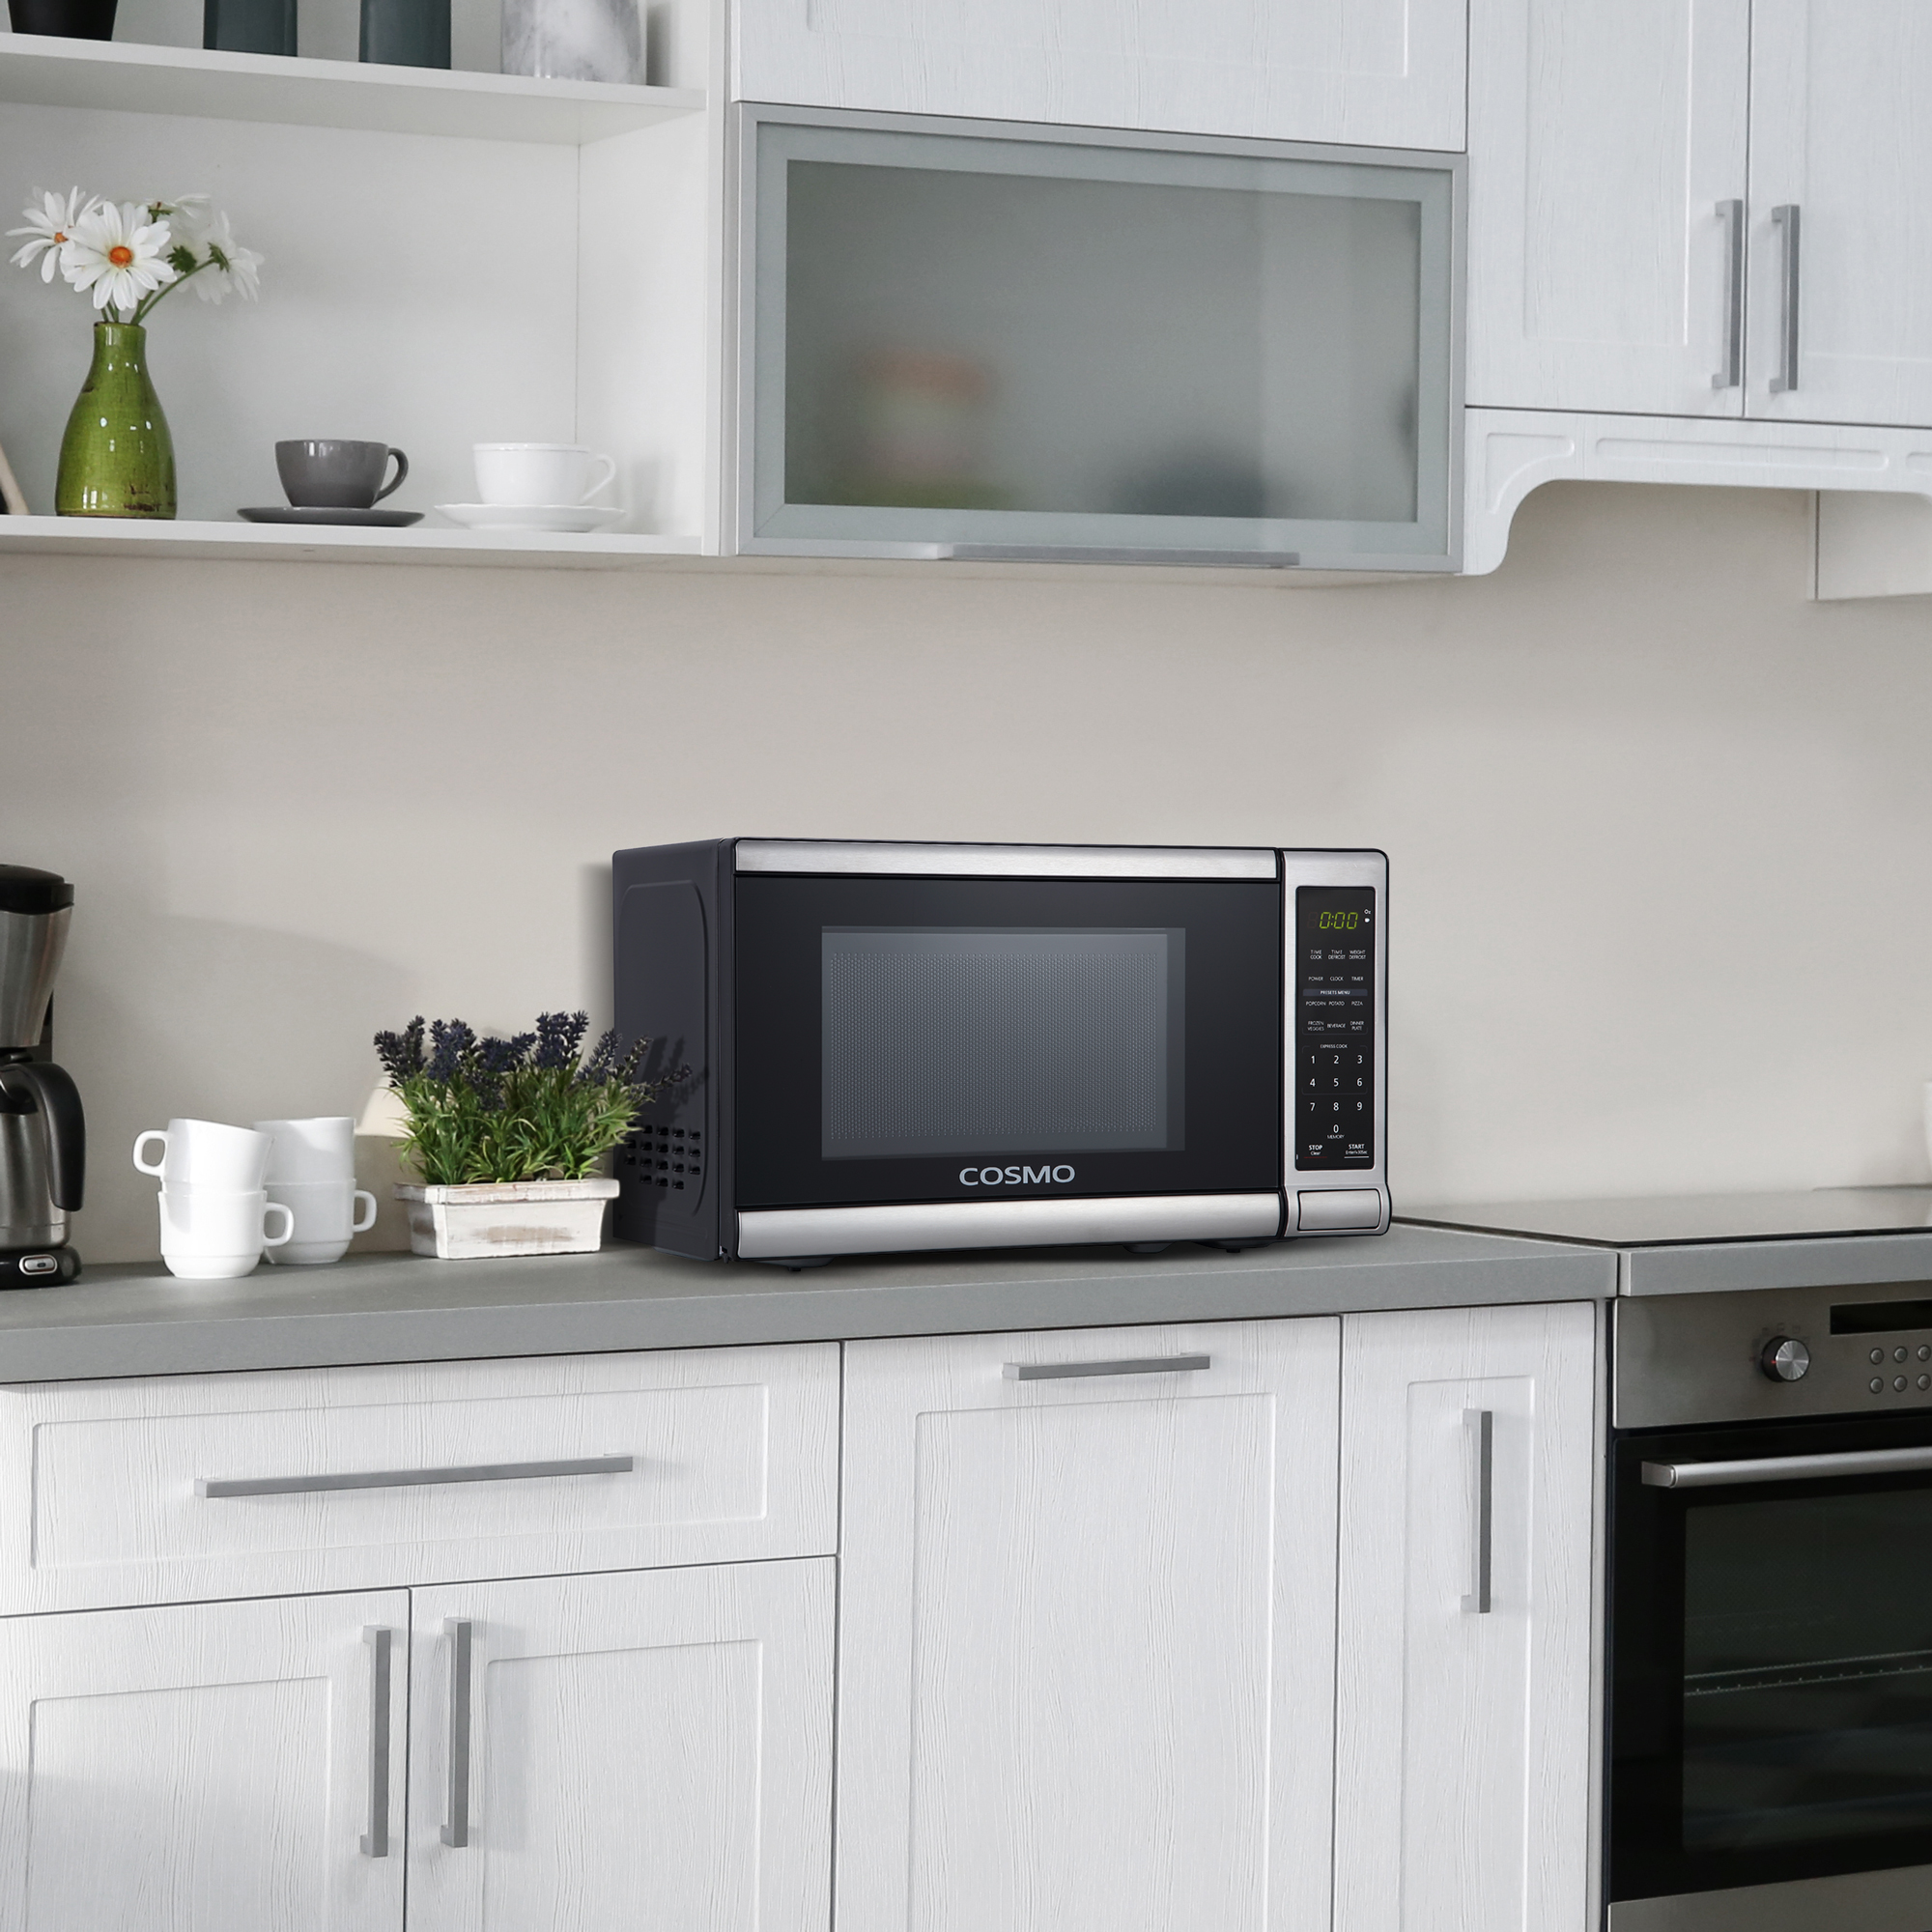 Why A Microwave Still Belongs in Your Kitchen